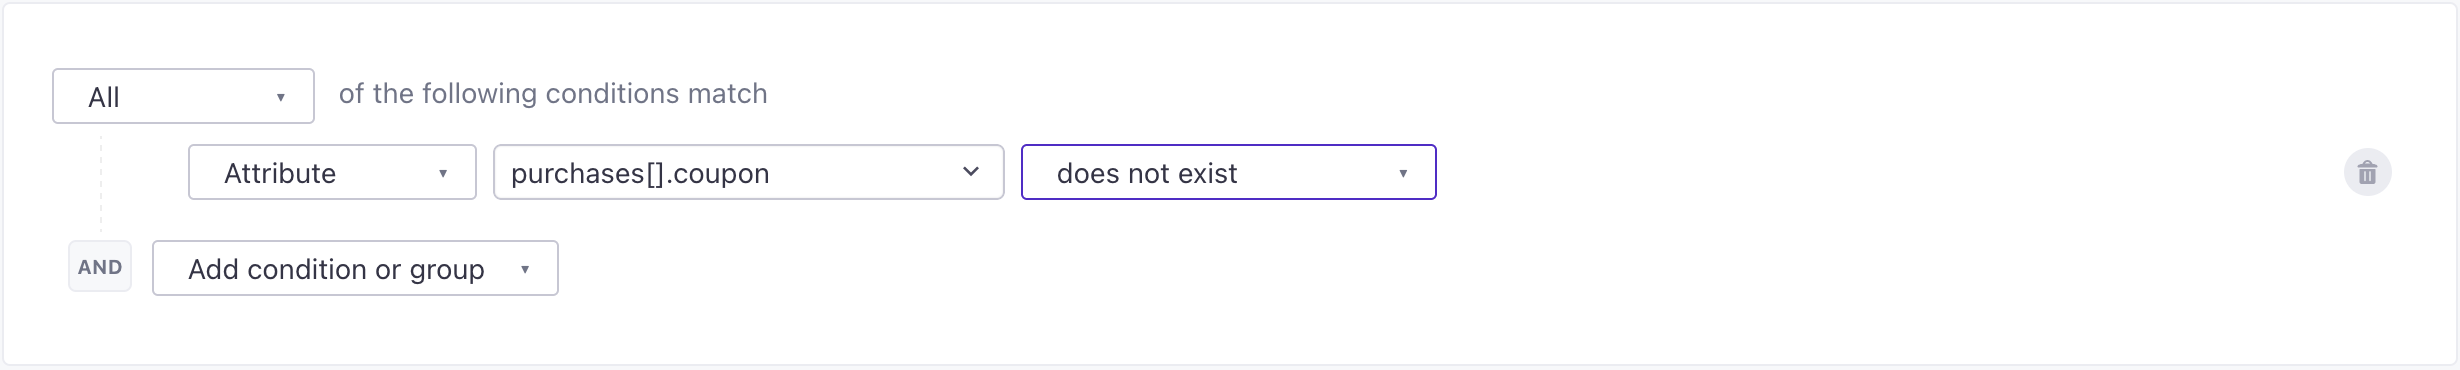 use the does not exist condition to check for an empty value